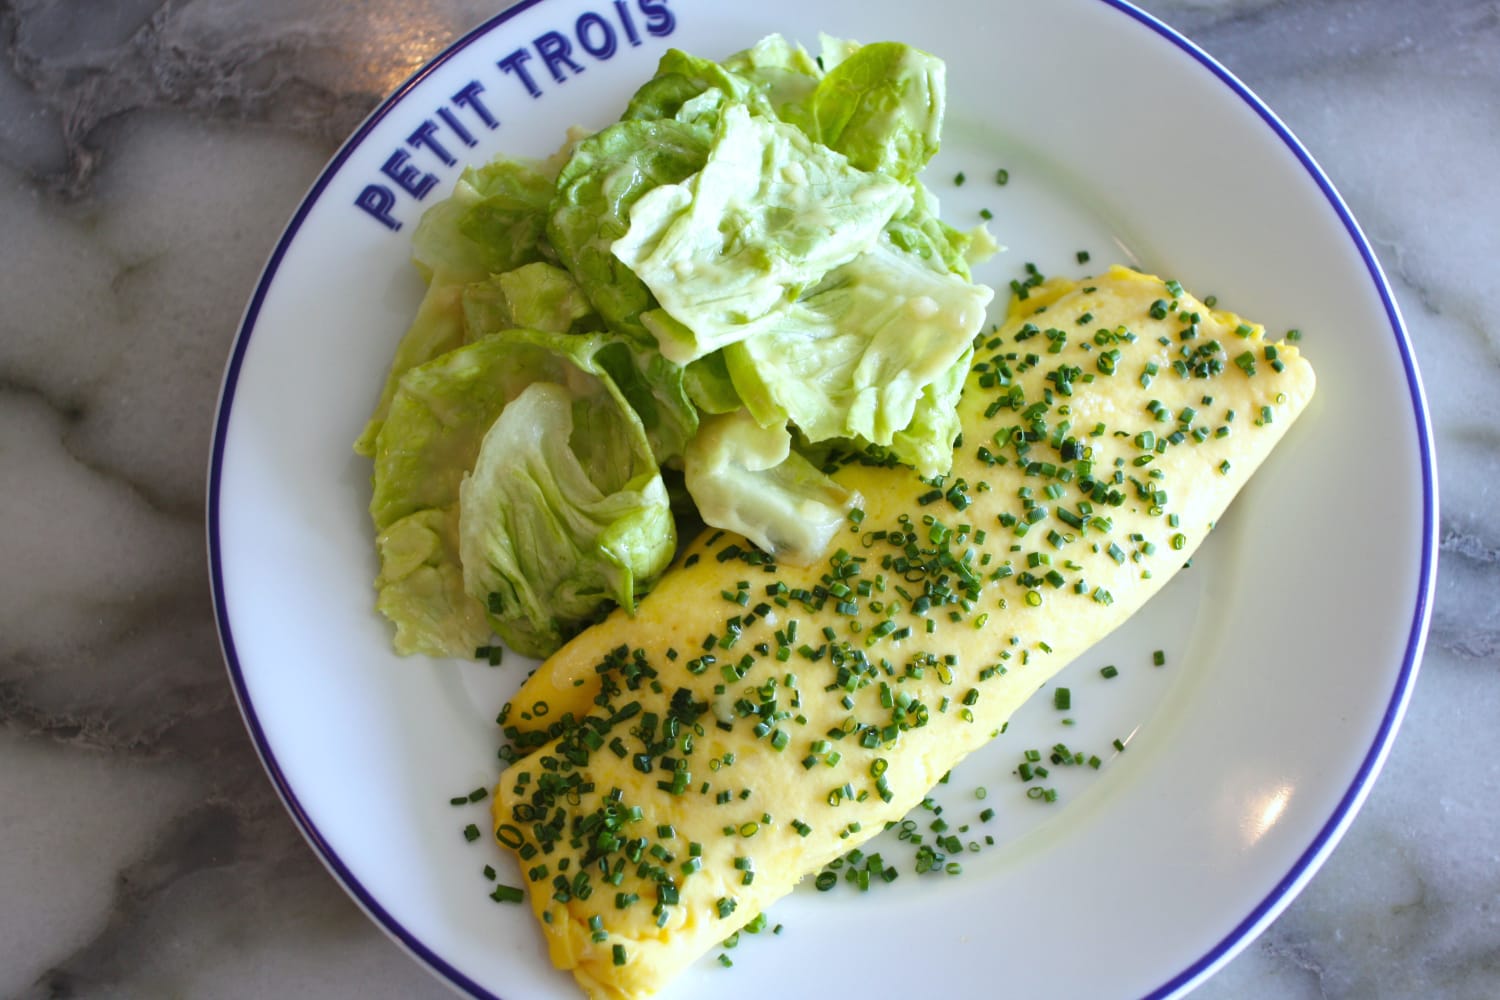 How to make the perfect French omelet